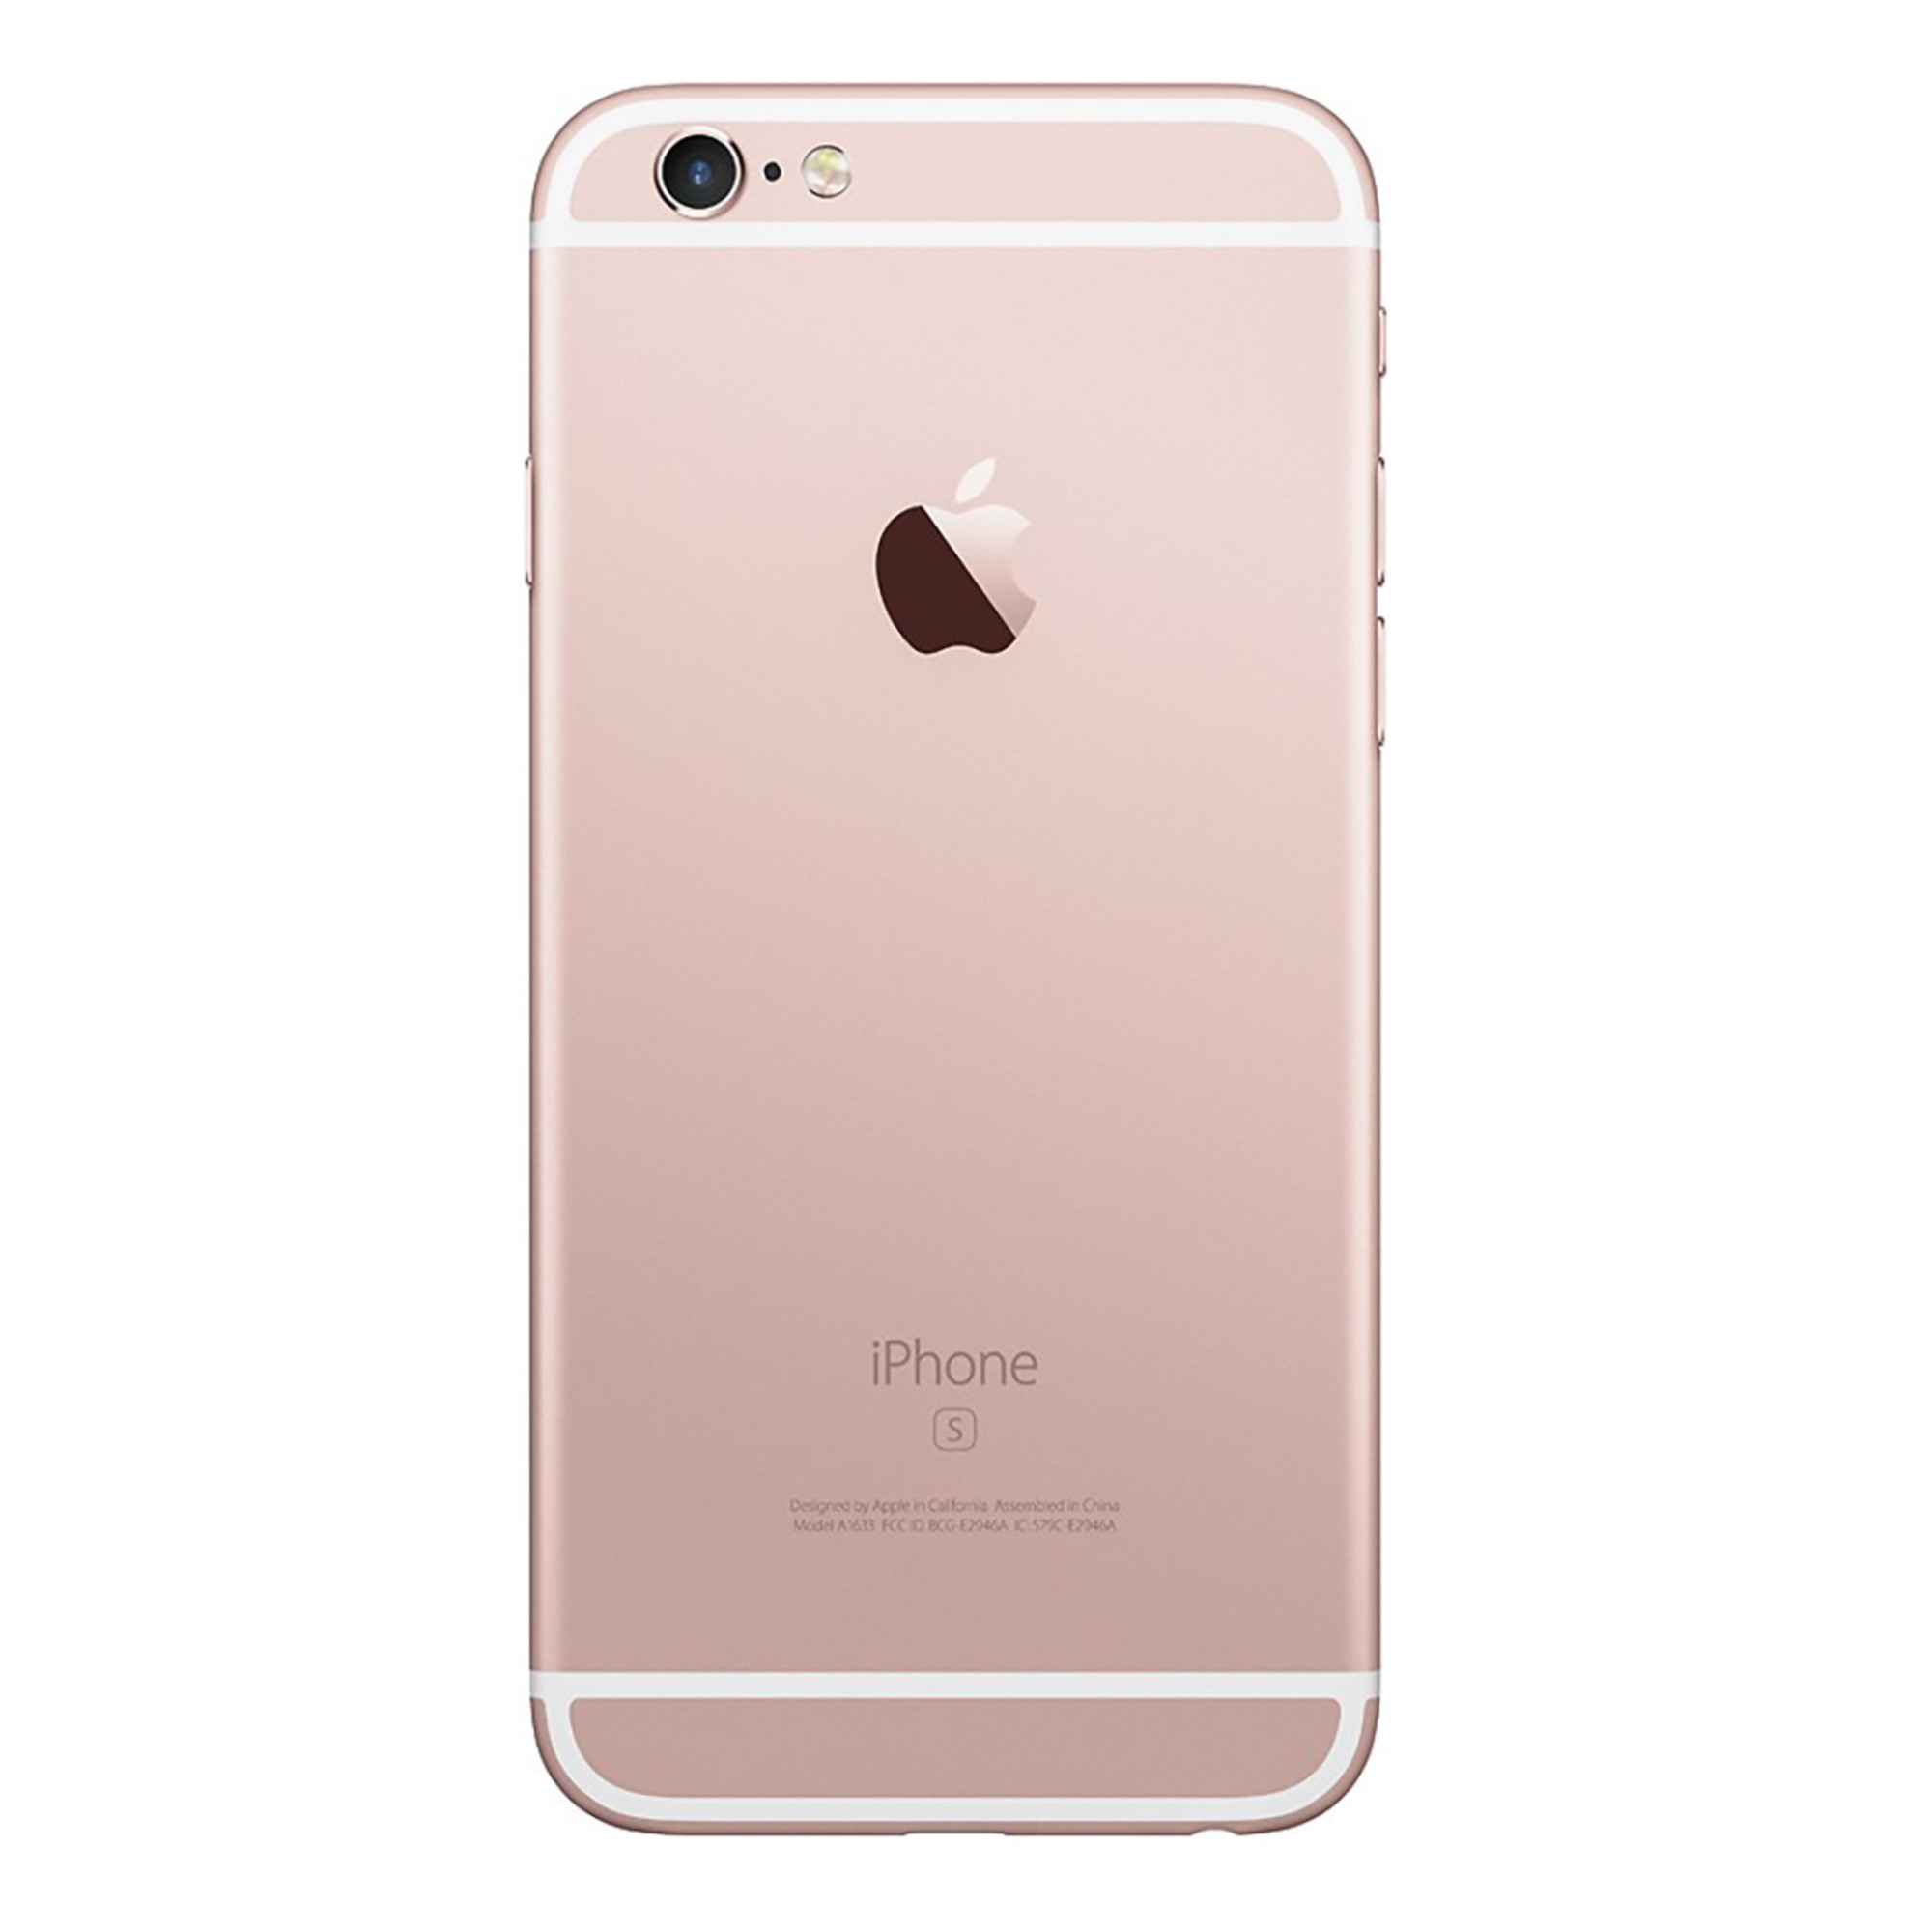 Apple iPhone 6s 32GB GSM Phone - Rose Gold (Used) + WeCare Alcohol Wipes Pack (50 Wipes) - image 2 of 6